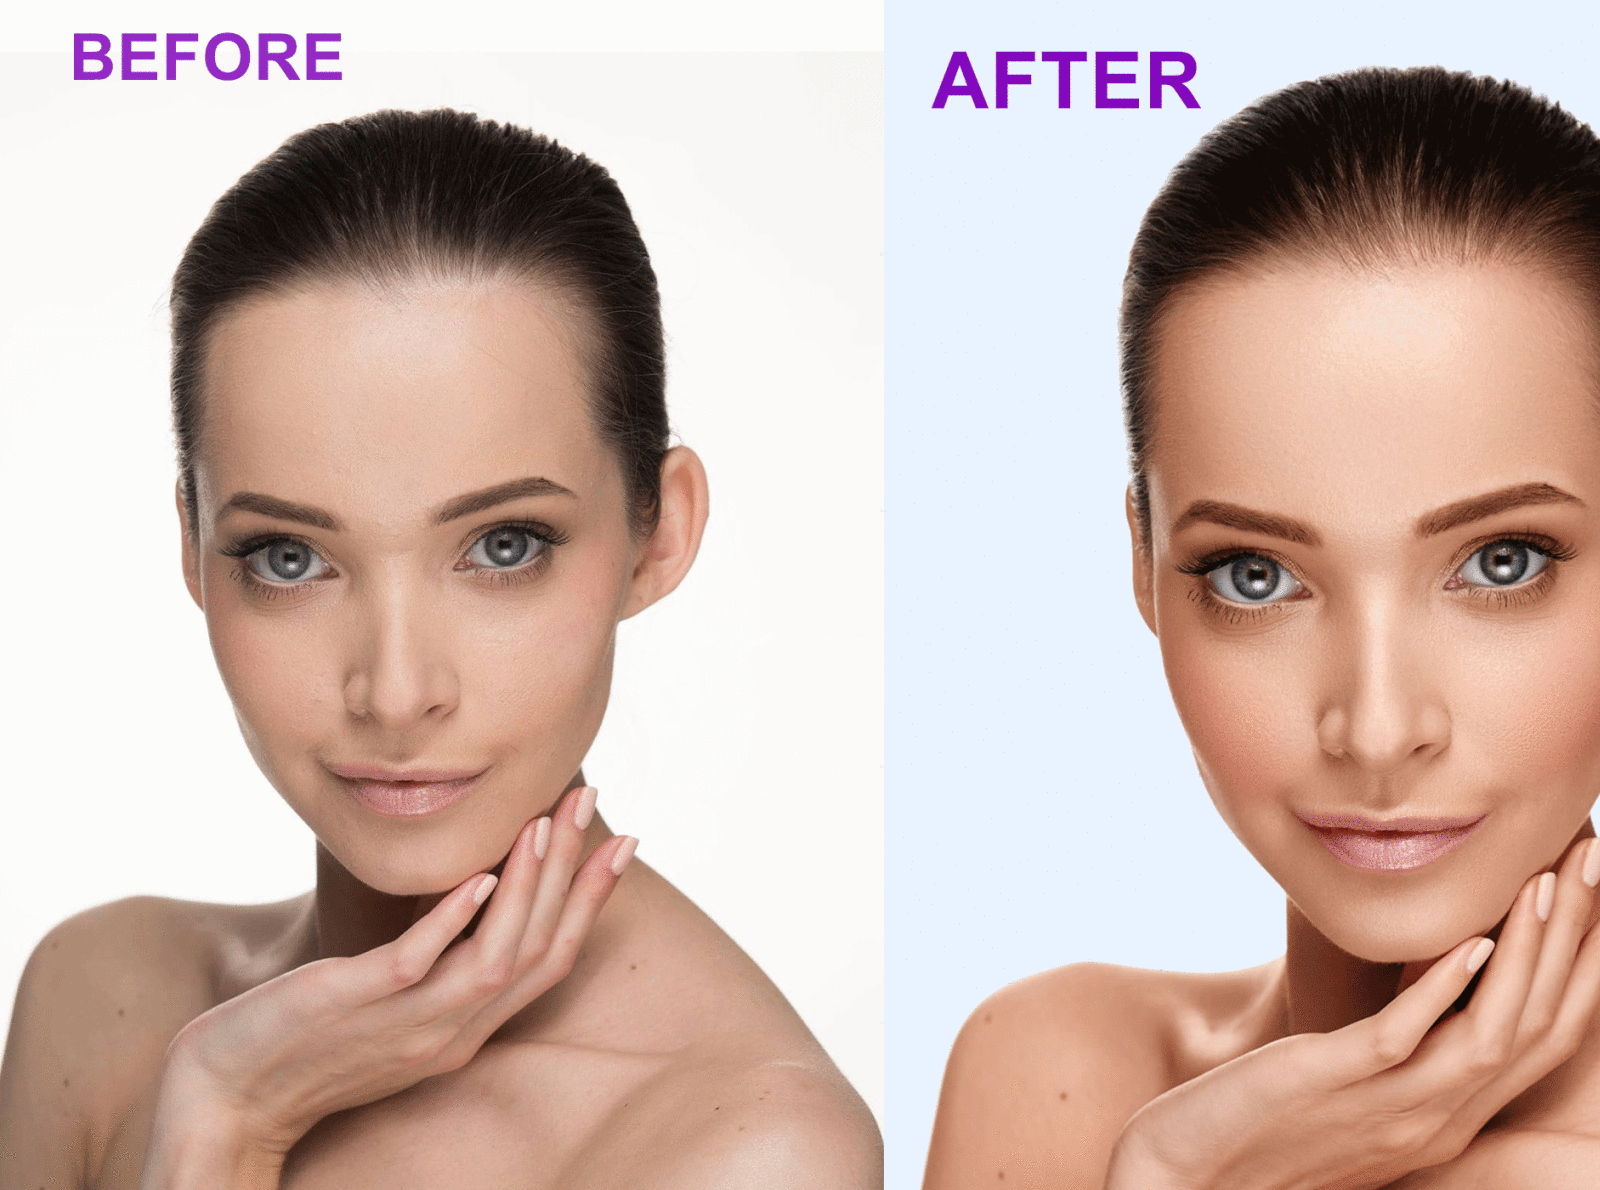 Retouching services professionally background removal clippingpath cropping design editing illustration product photo editing remove background transparent white background